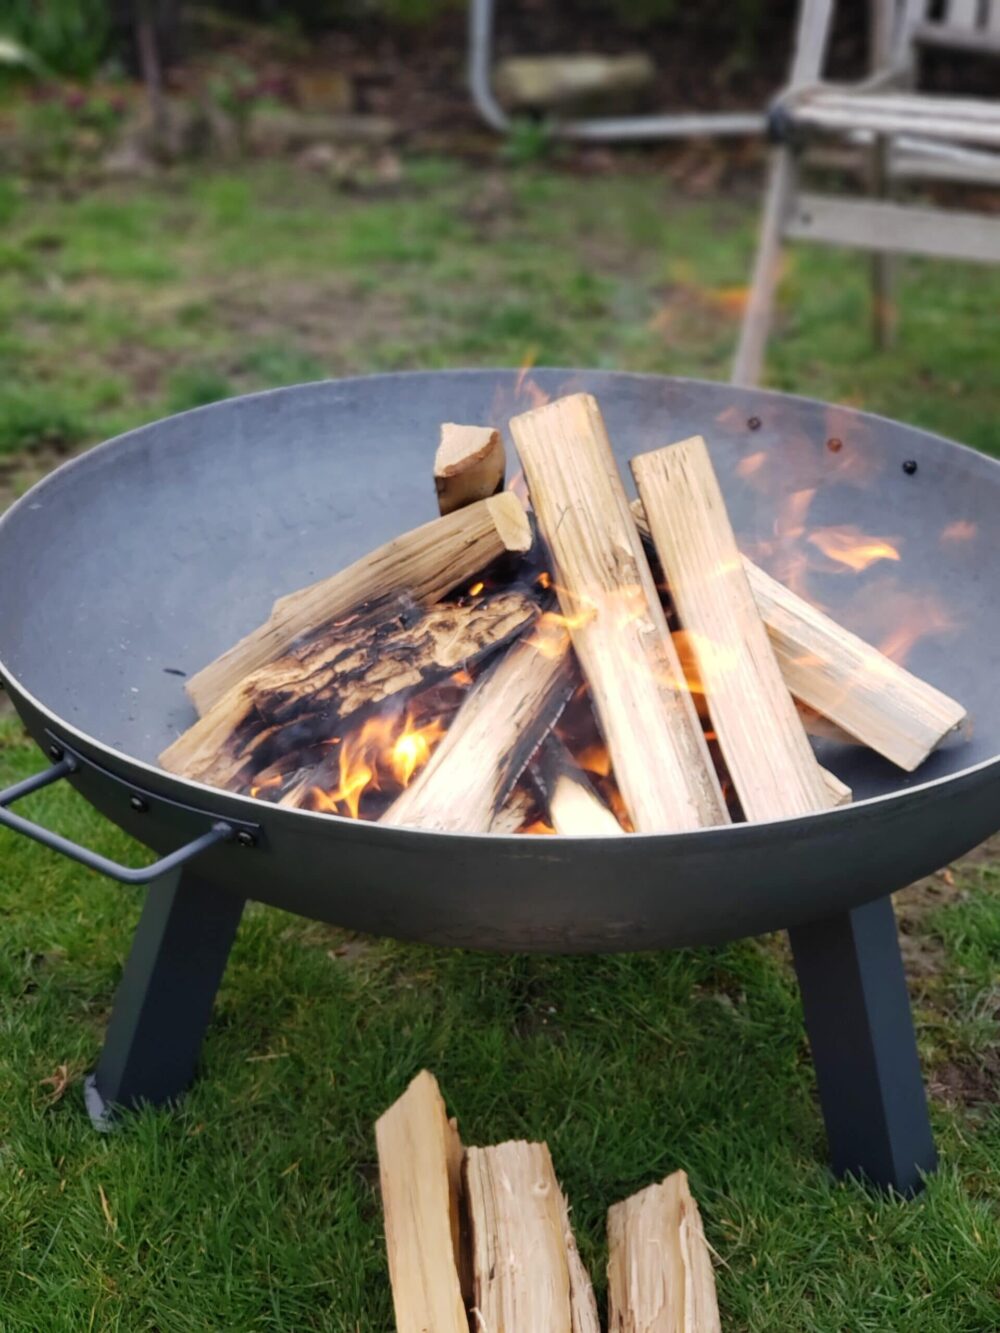 Fire Pit On Grass 5 Best Ways To, How To Protect Grass From Portable Fire Pit